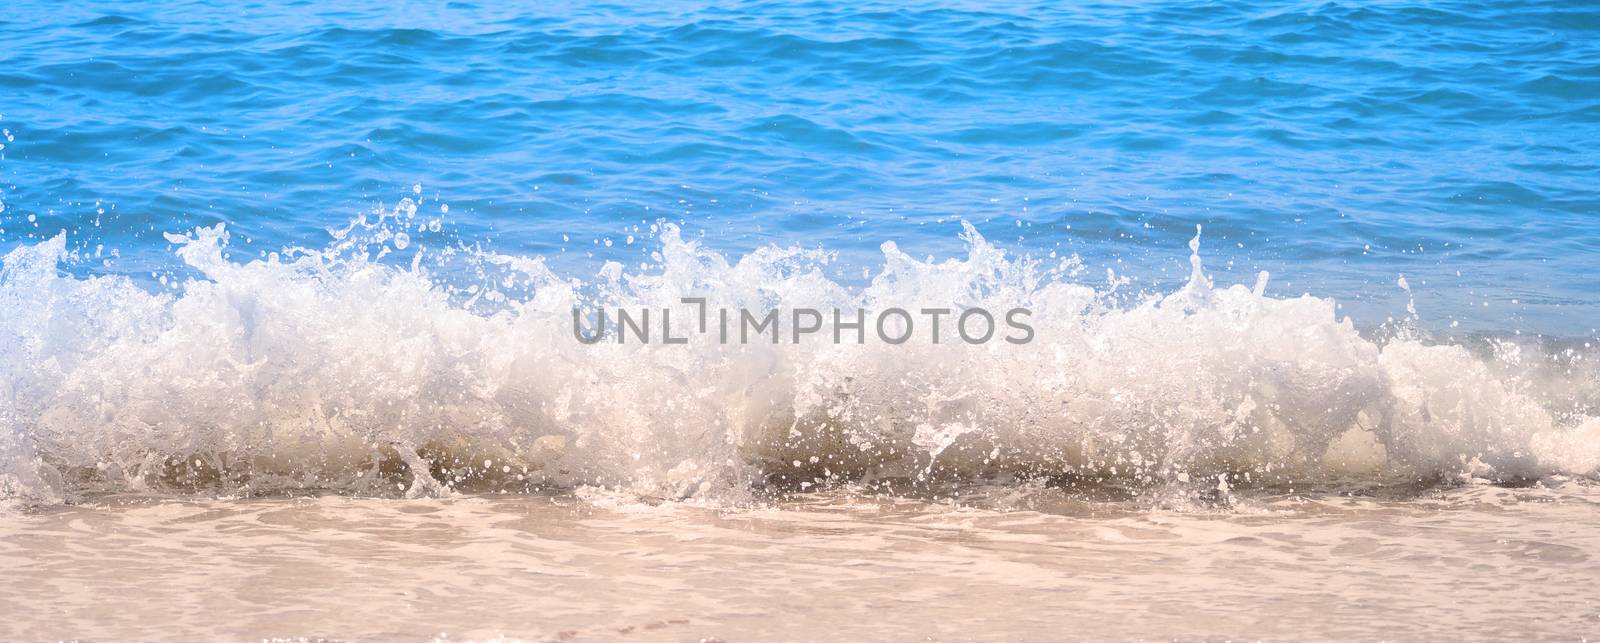 Clear light blue color sea water splashing to beach by gnepphoto